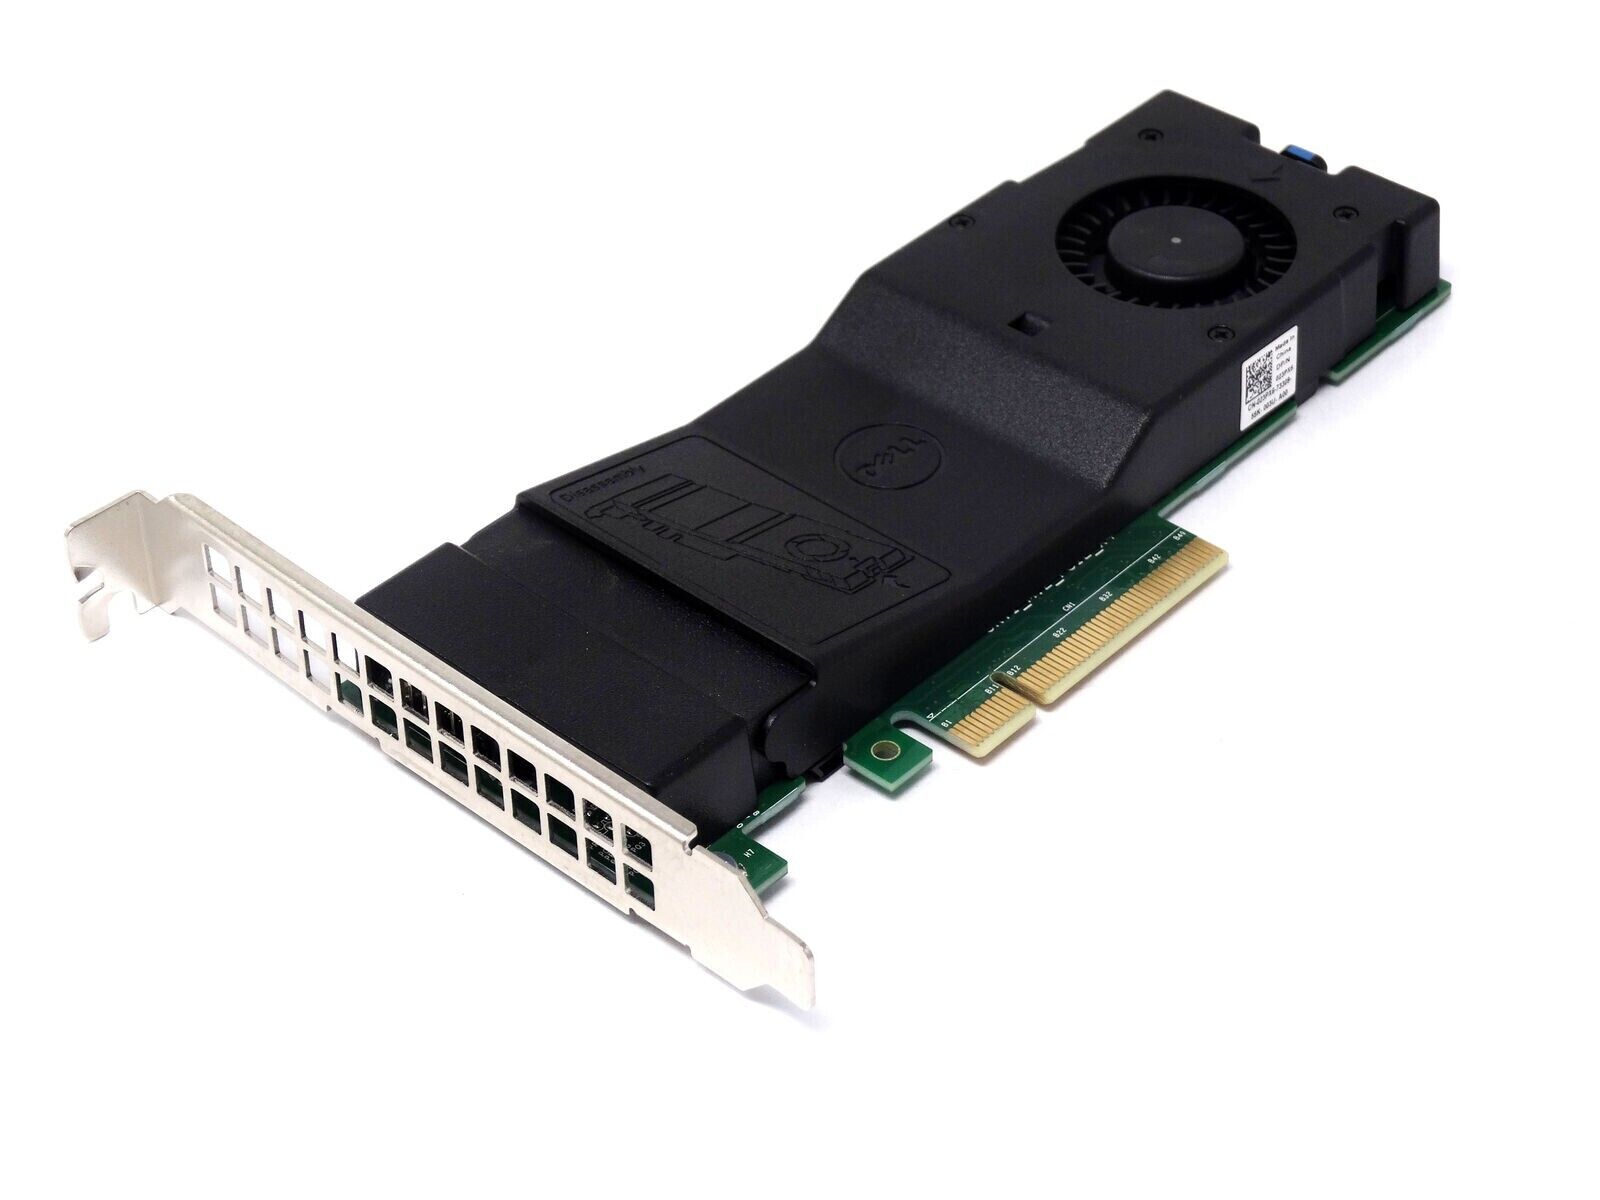 Dell NVMe SSD M.2 PCIe x2 Solid State Storage Adapter Card